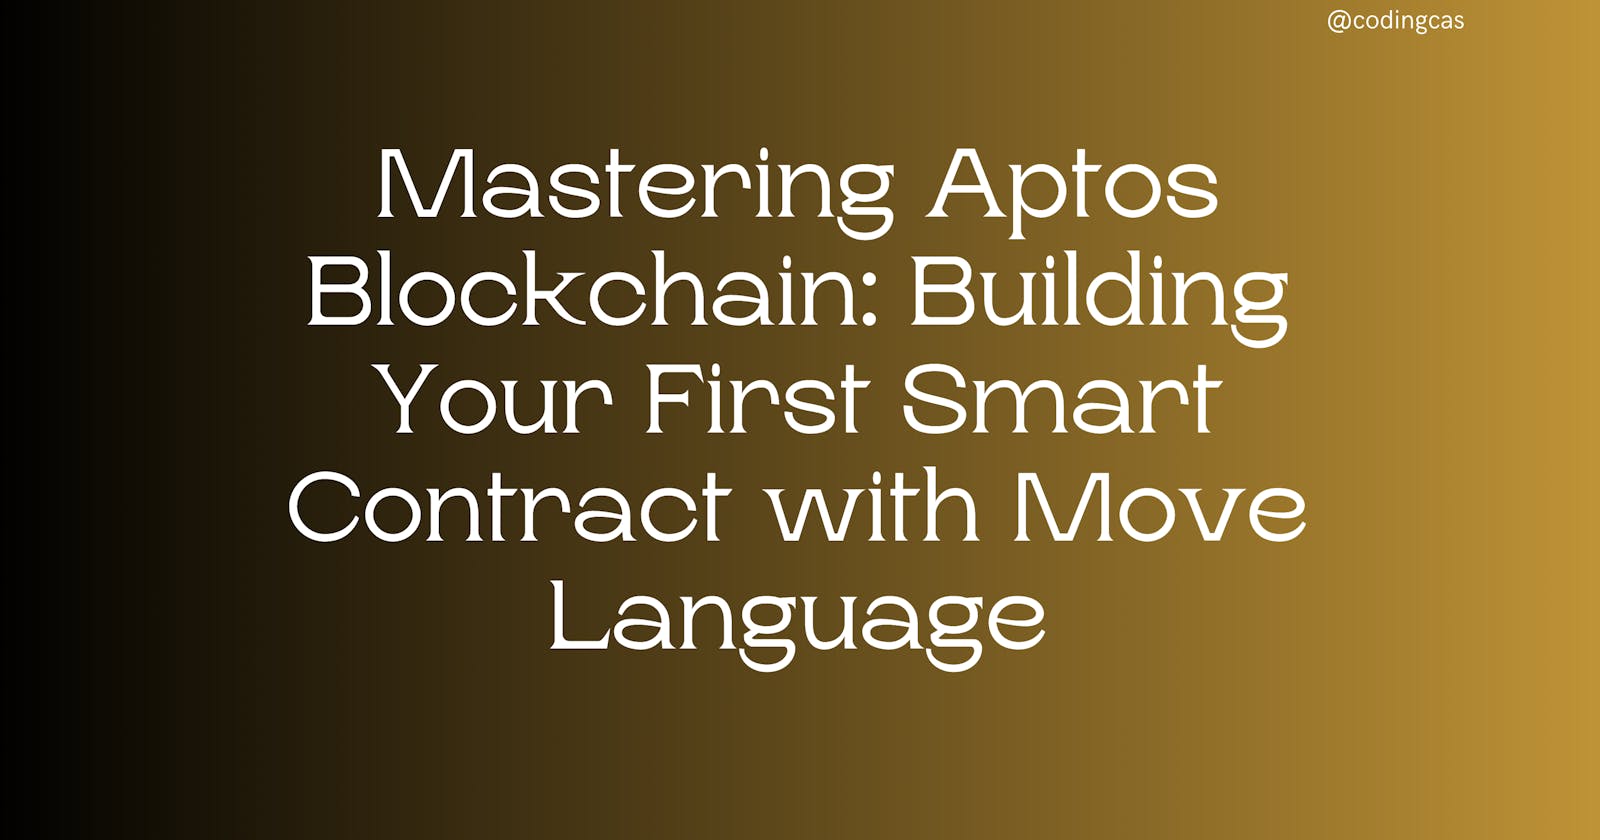 Mastering Aptos Blockchain: Building Your First Smart Contract with Move Language